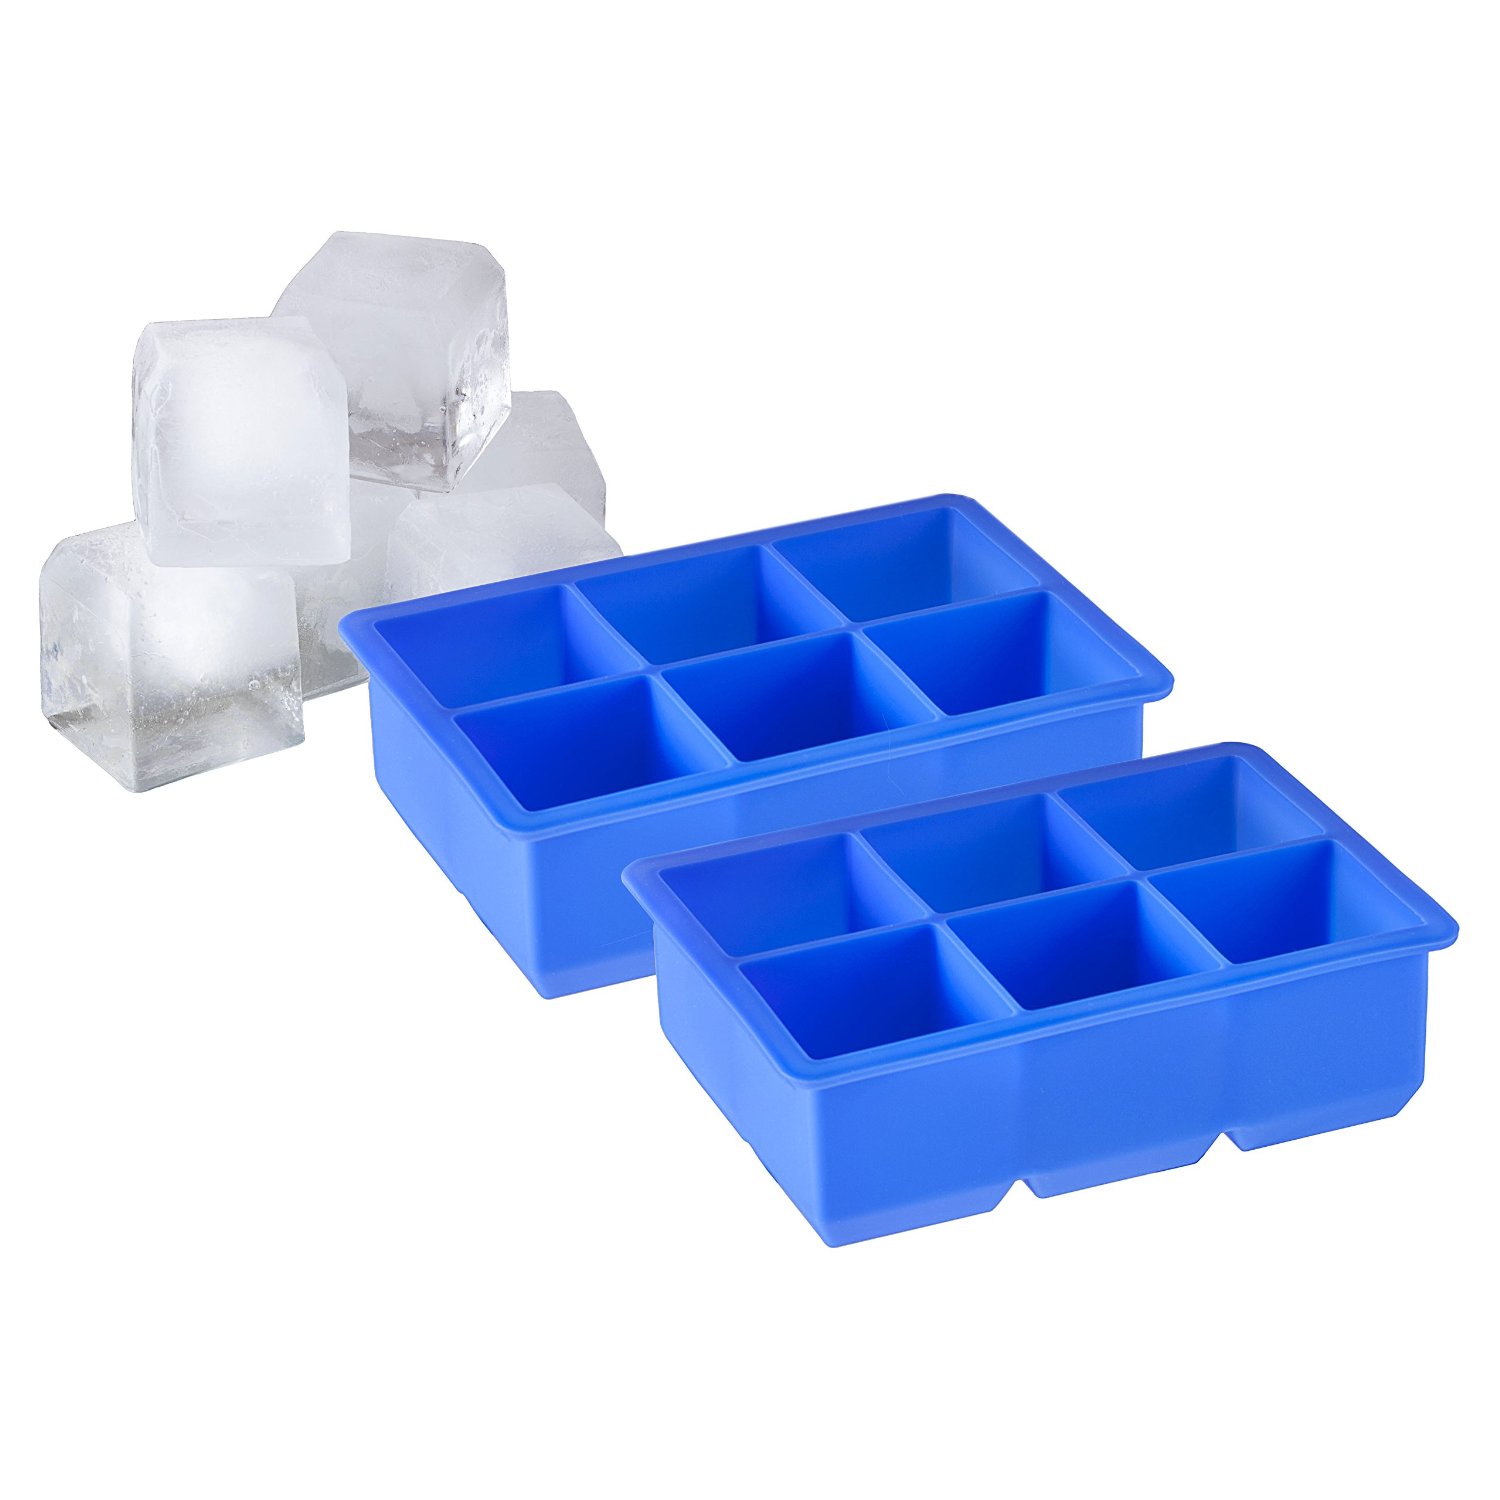 FDA approved silicone tray mold Silicone Ice Cube Trays